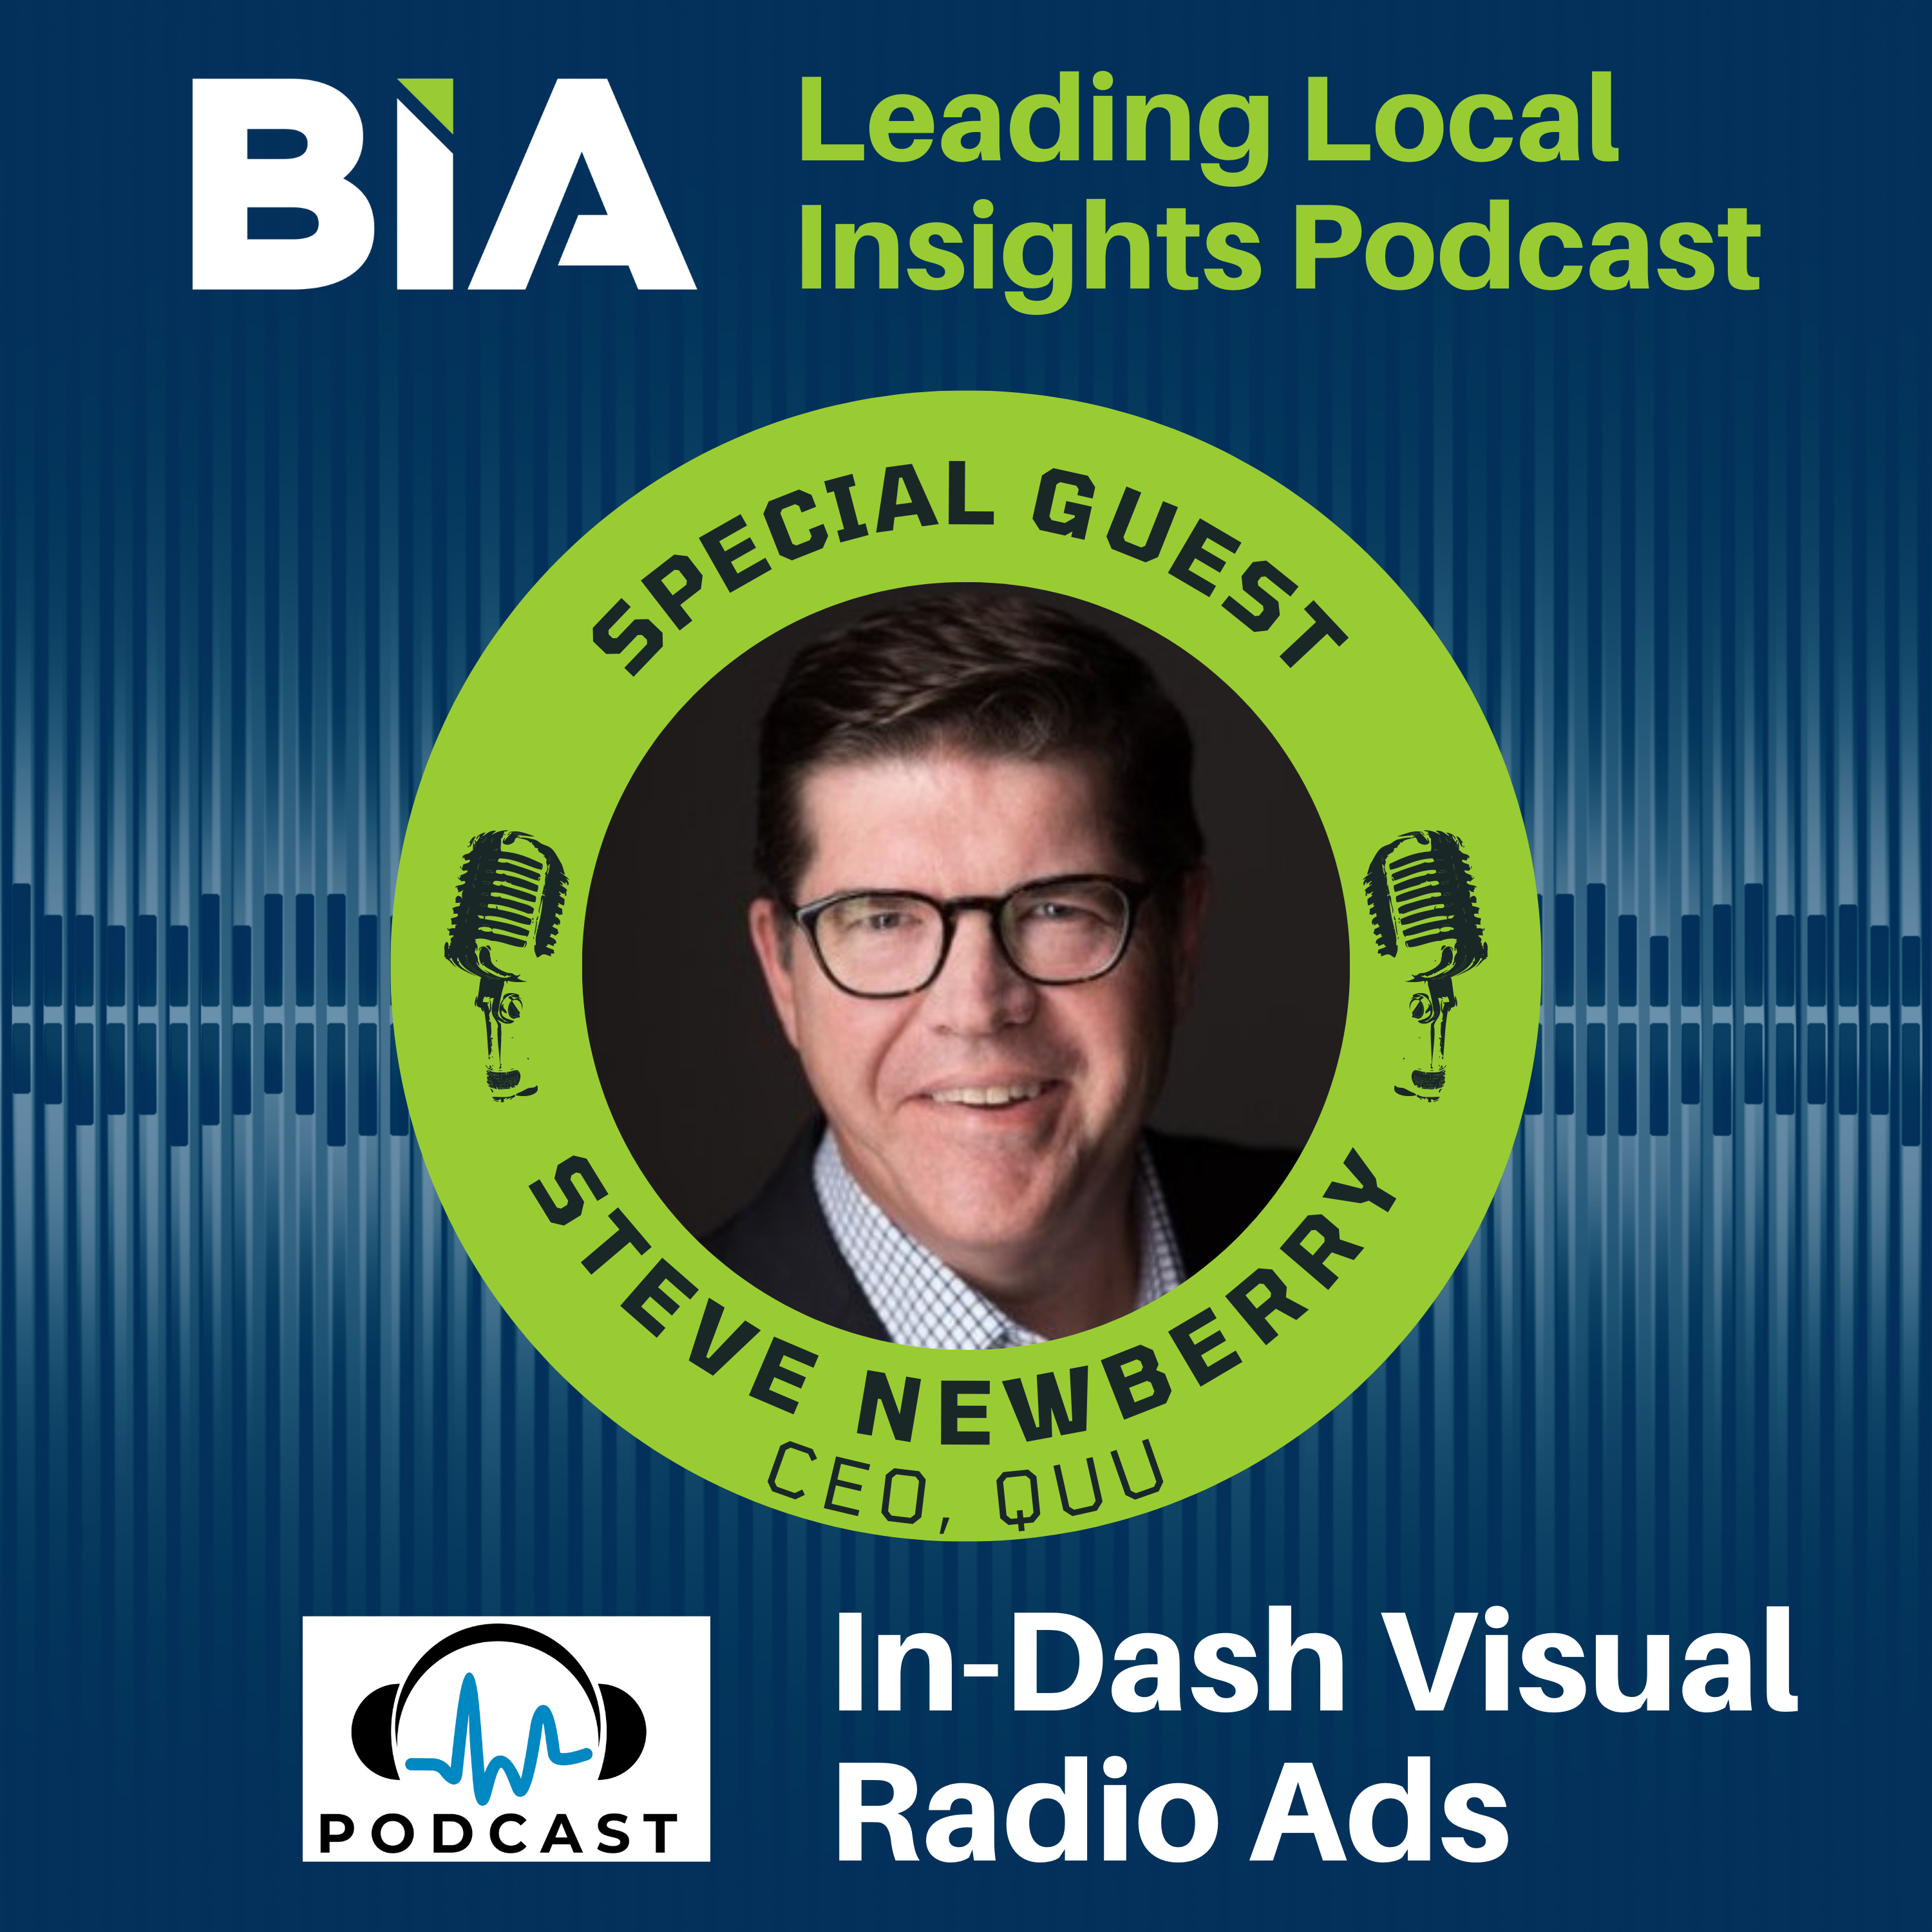 In-Dash Visual Radio Ads: Conversation With Quu’s Steve Newberry On BIA Podcast